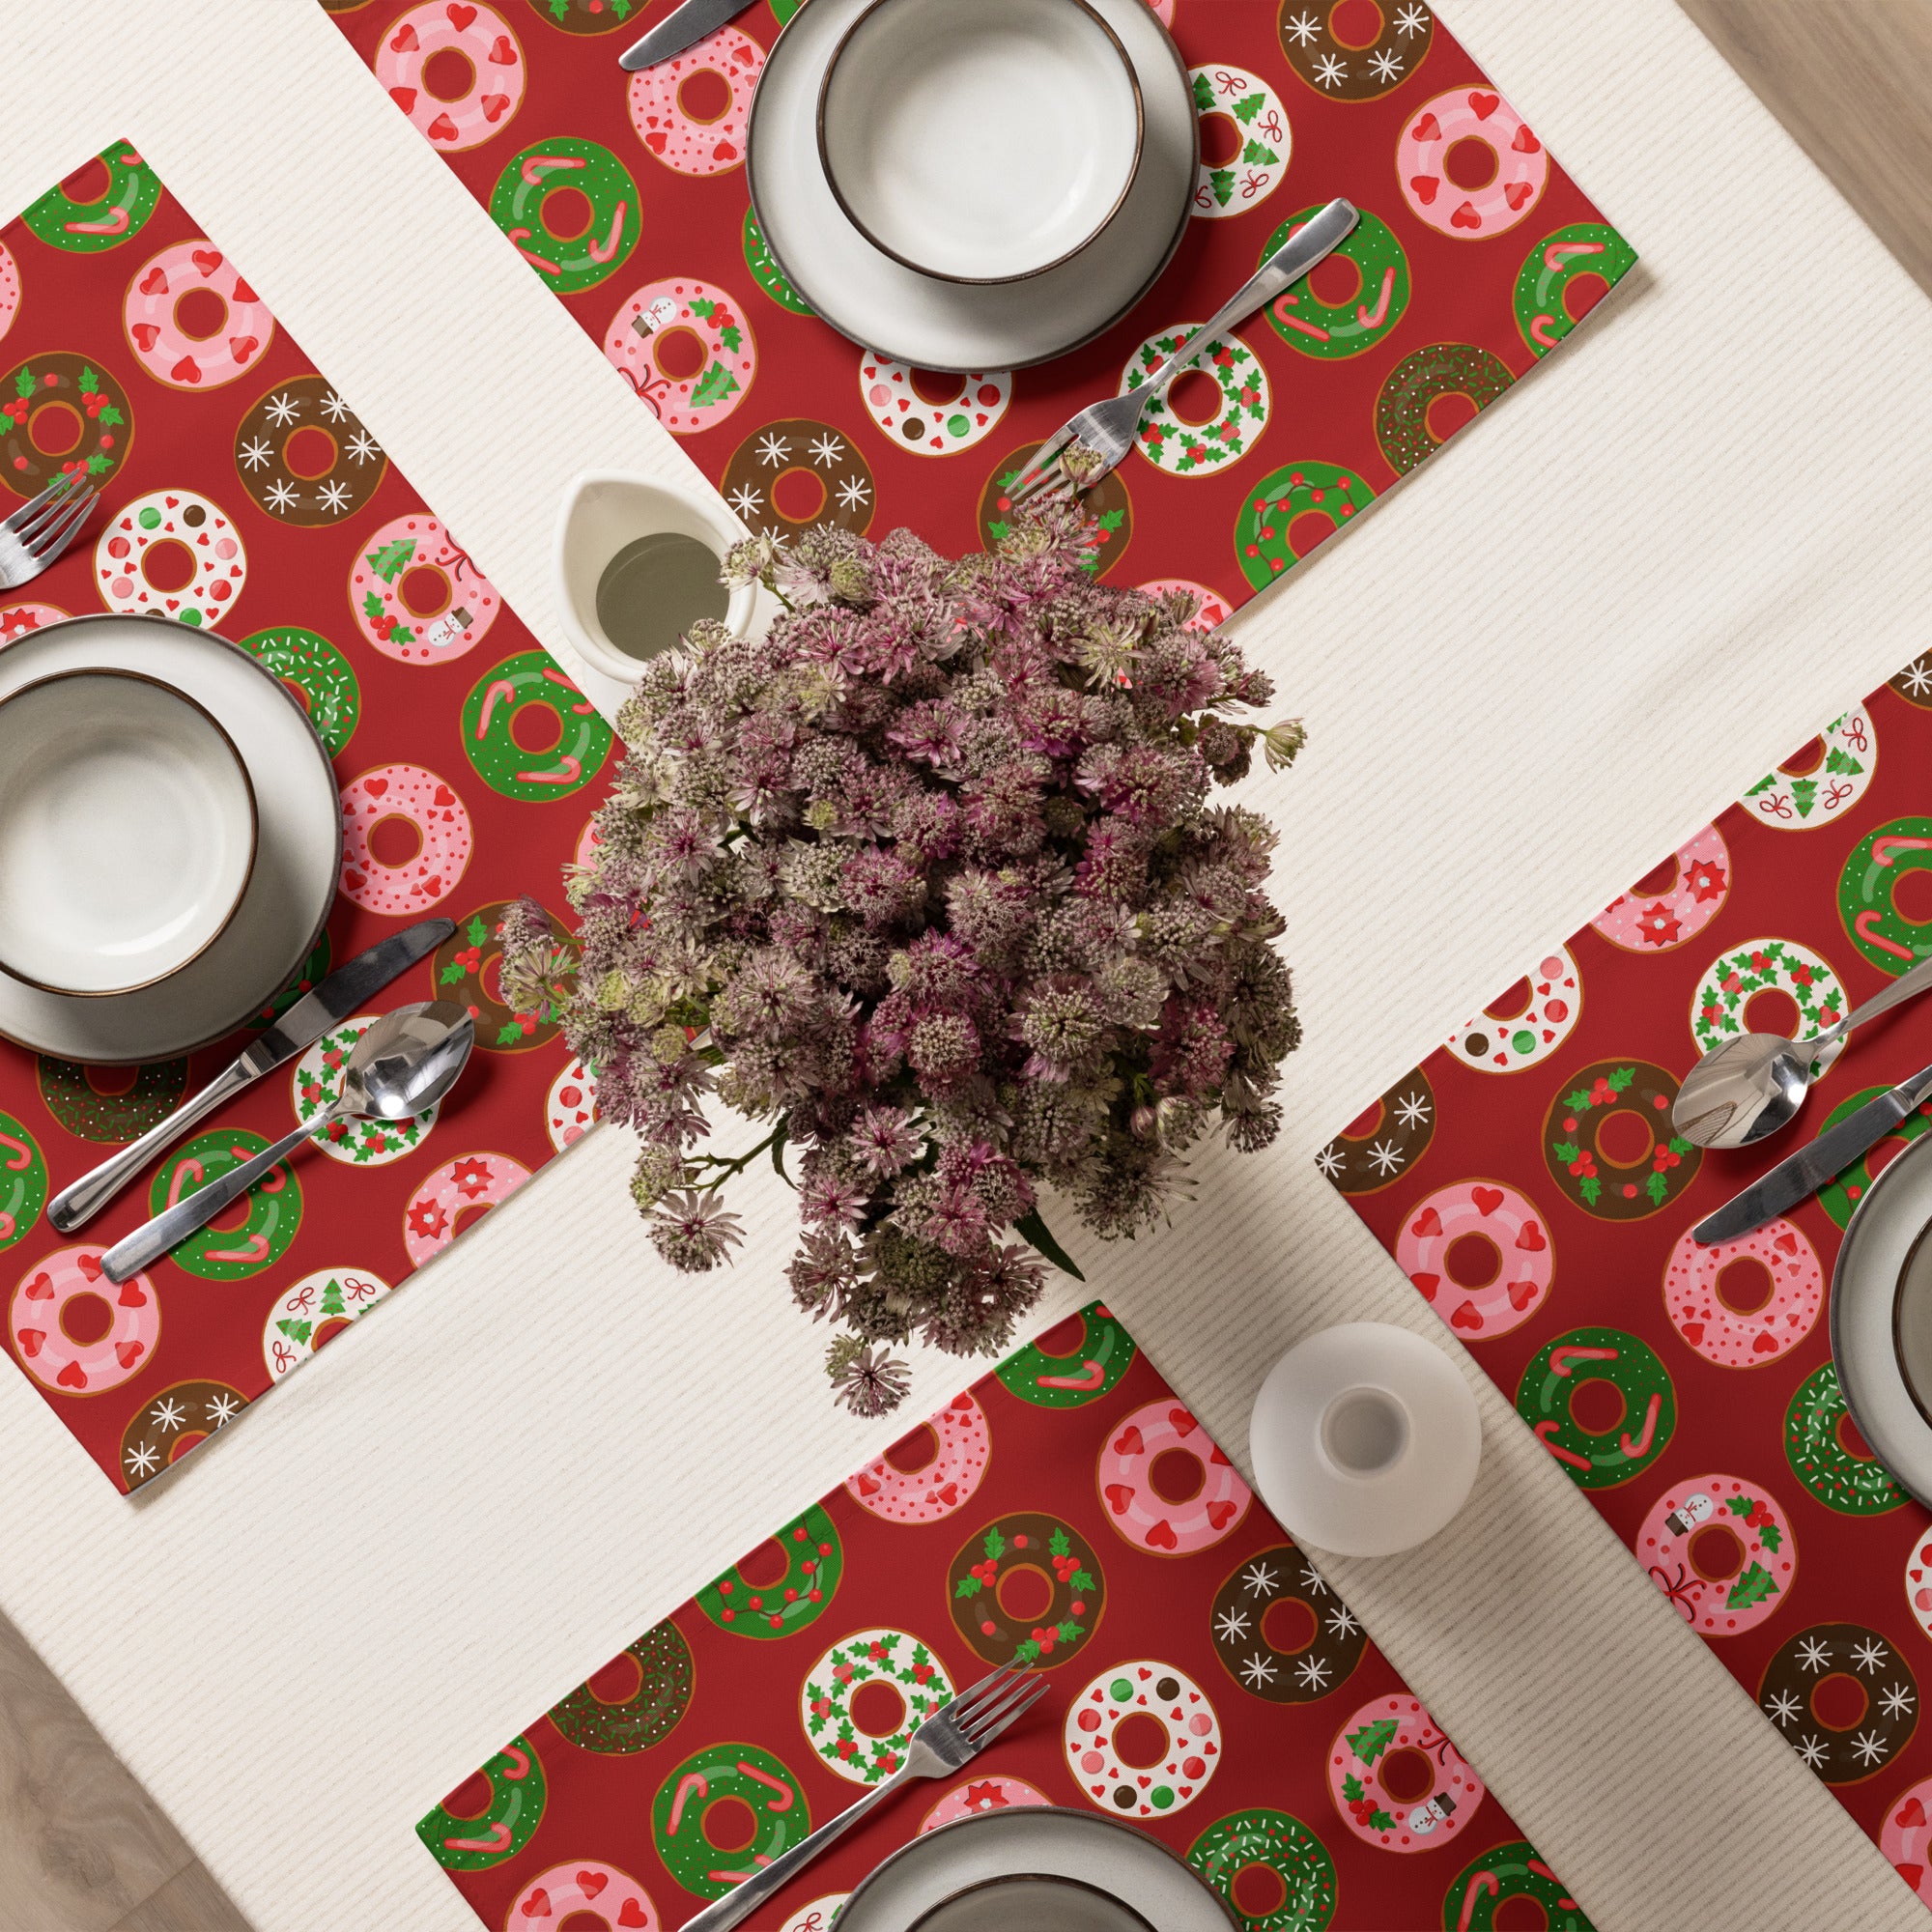 Christmas Donuts Placemat Set